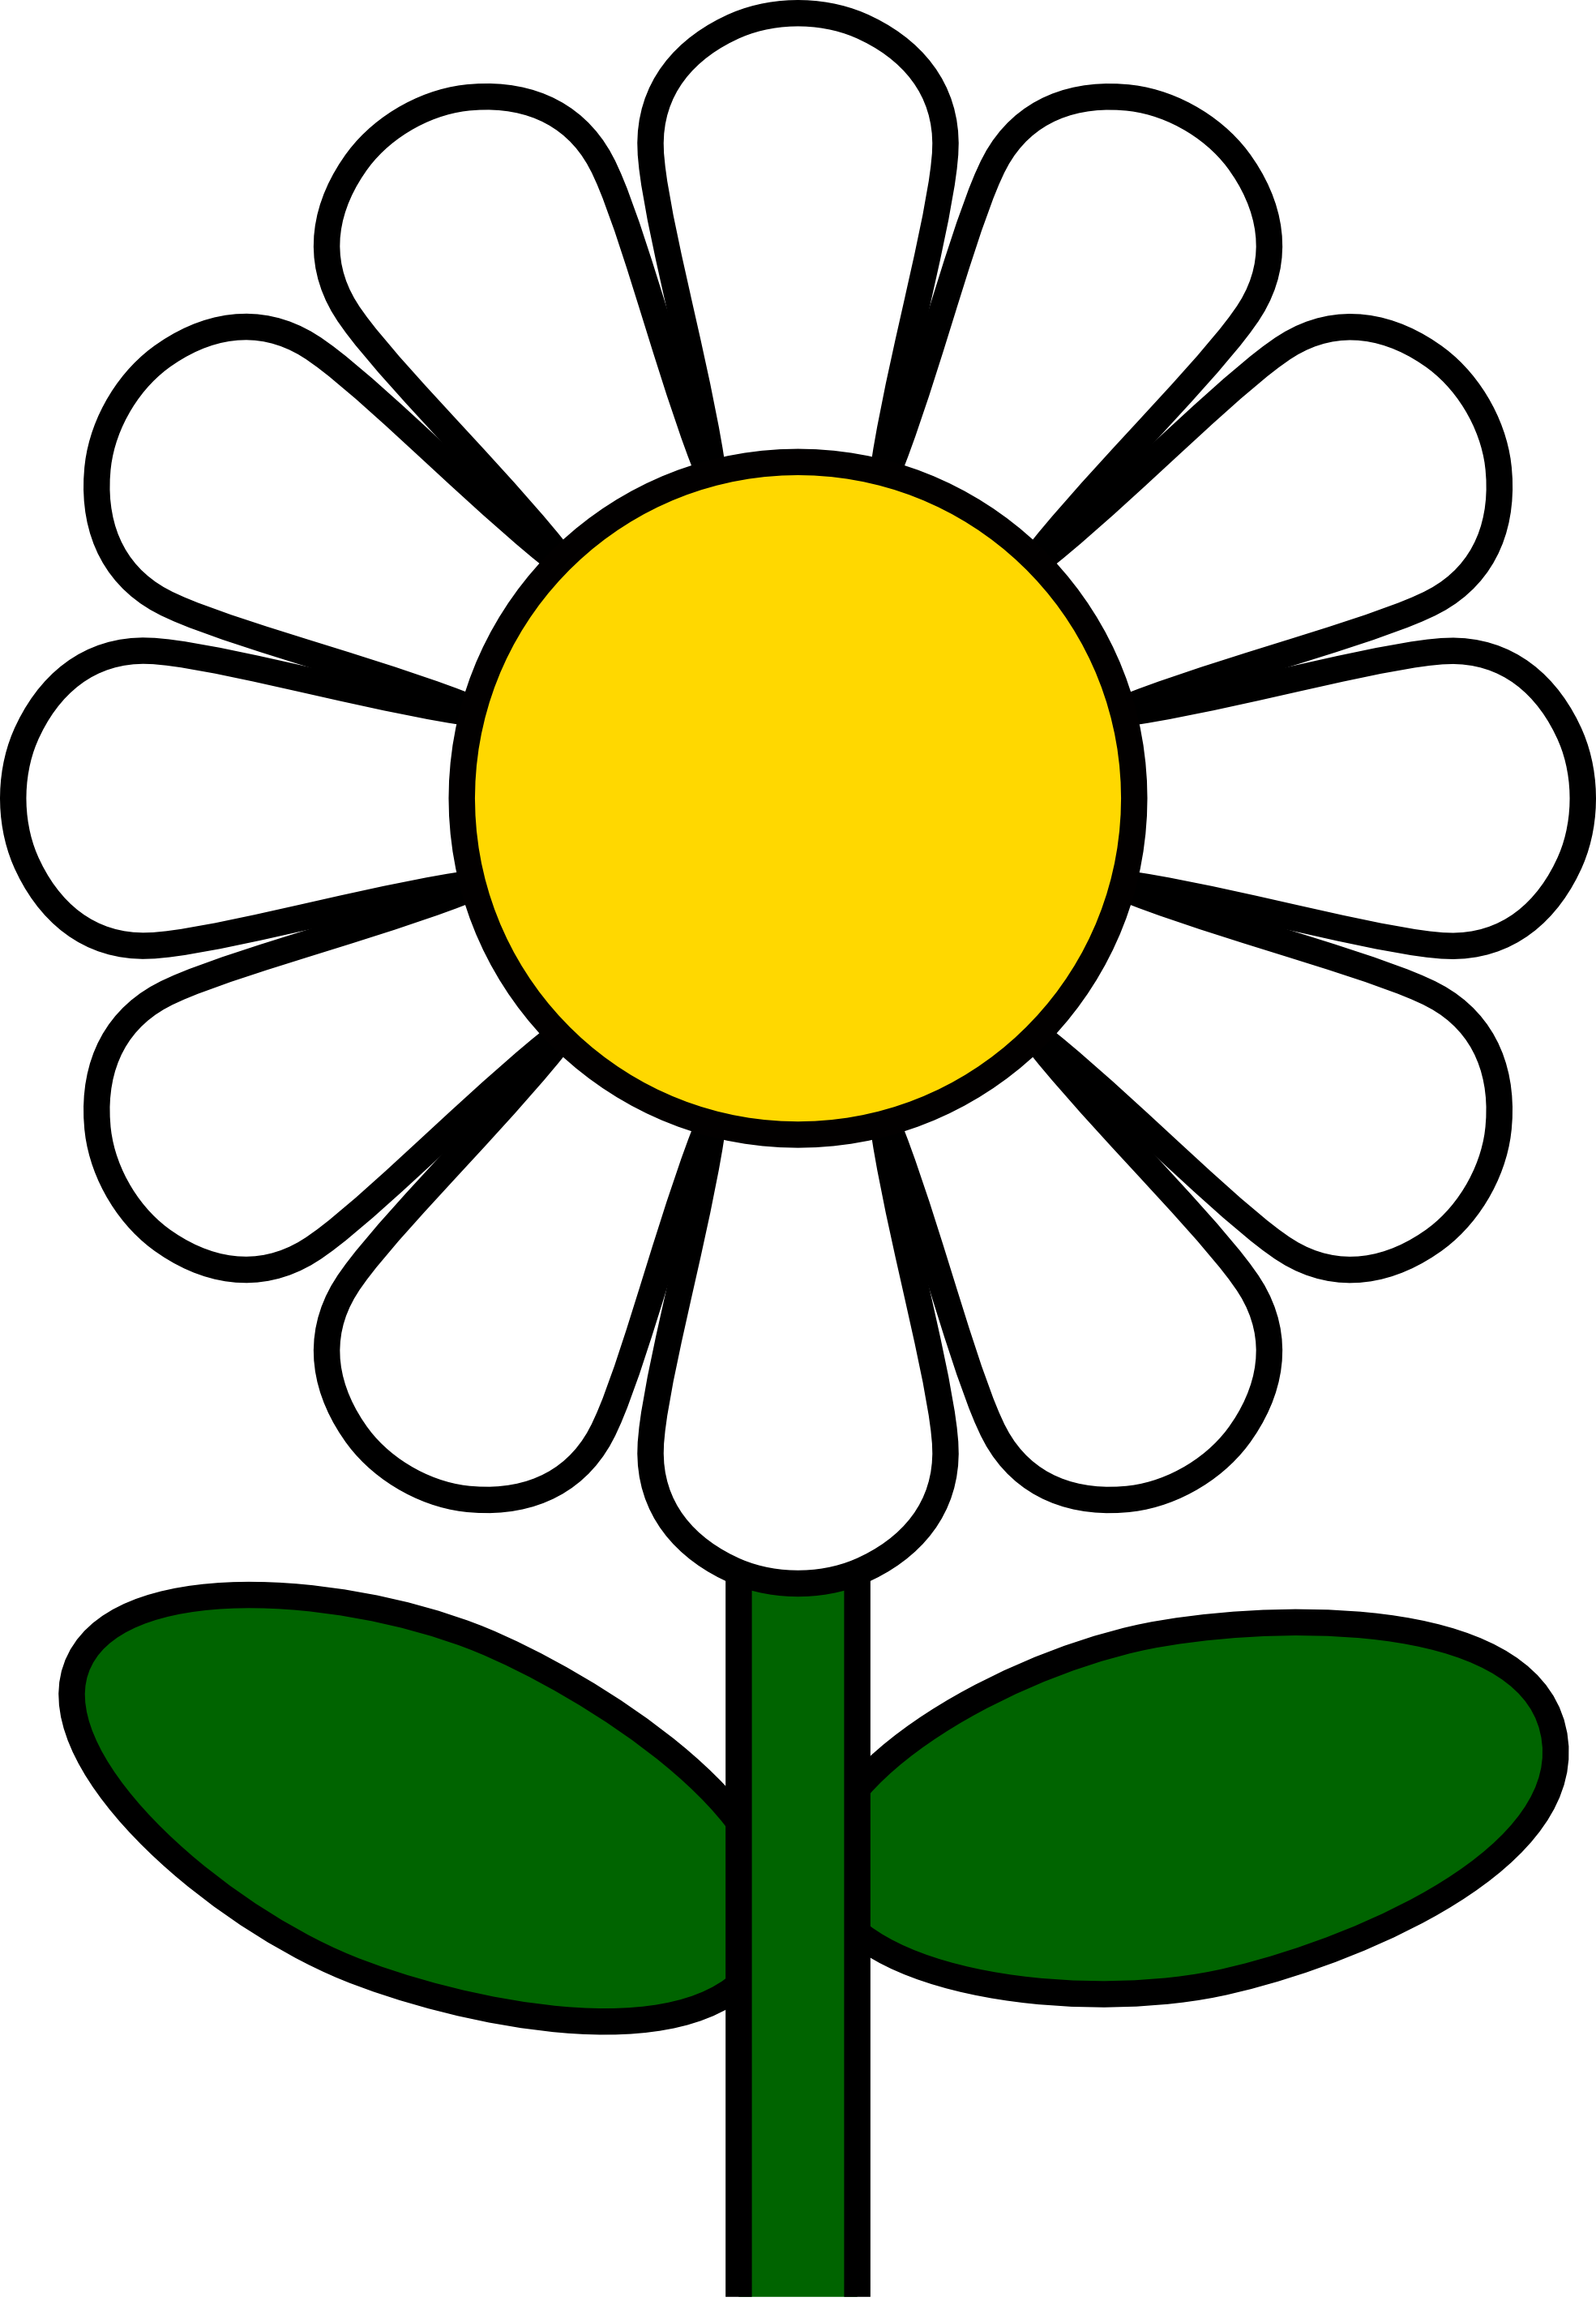 Daisy Clip Art Flowers - Free Clipart Images